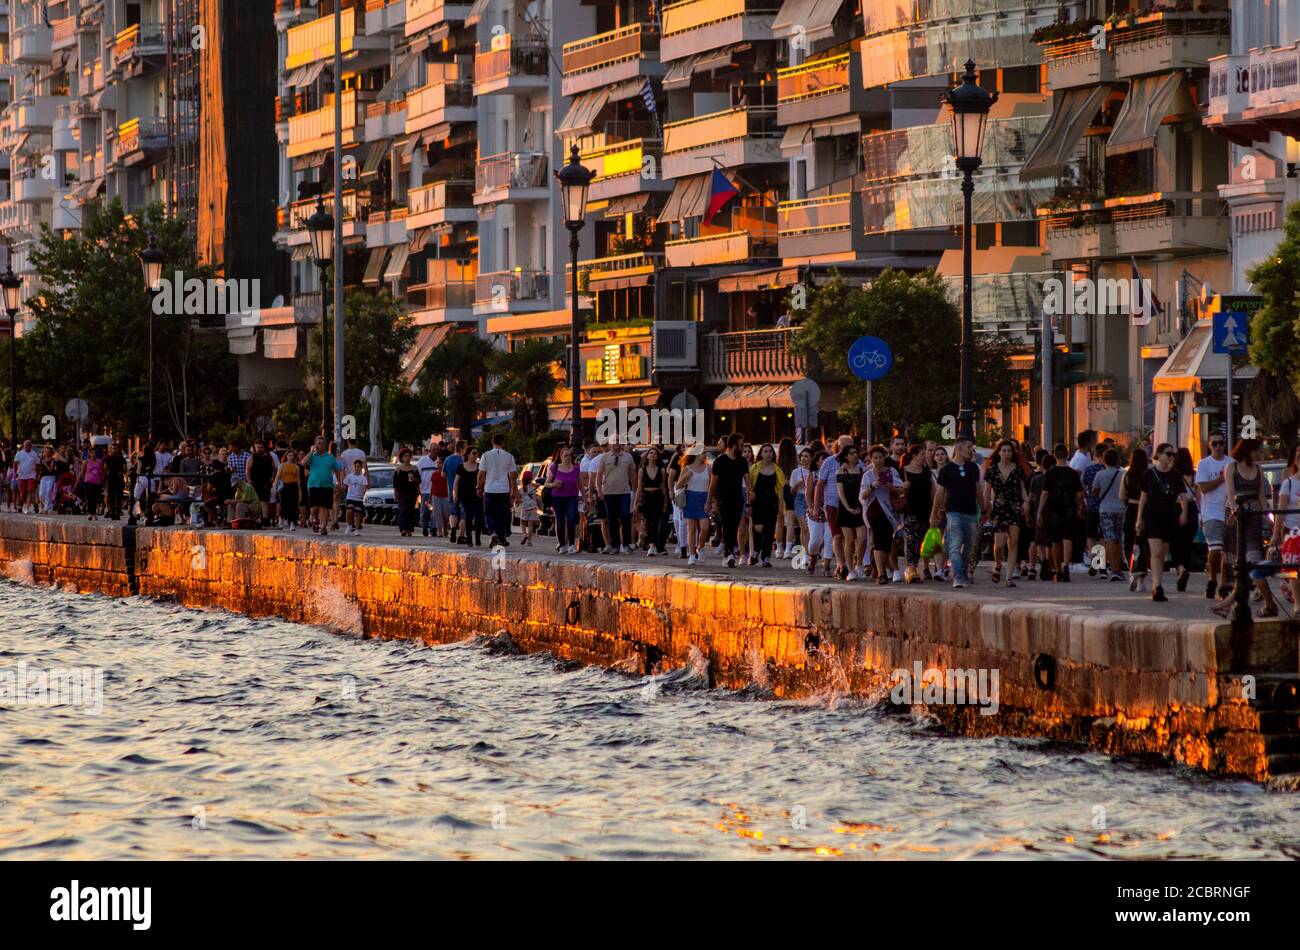 THESSALONIKI, GREECE - 27 June 2020 - A crowded seafront in Thessaloniki, Greece, which has a COVID-19 curfew from 11PM to 7AM for businesses to try a Stock Photo